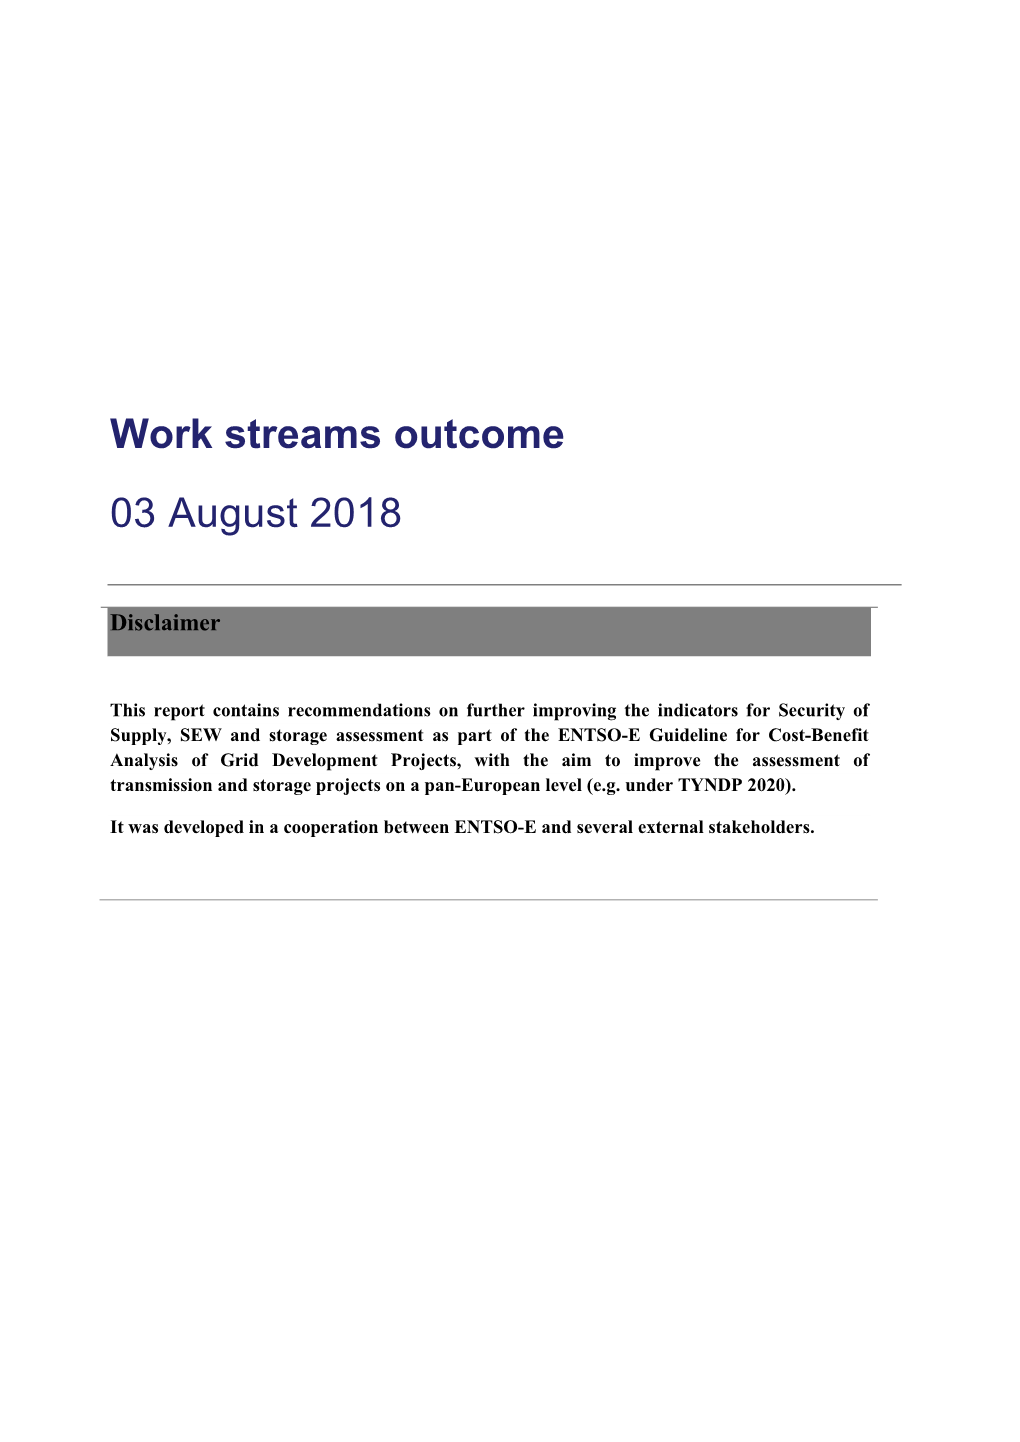 Outcome of Workstreams Organised With